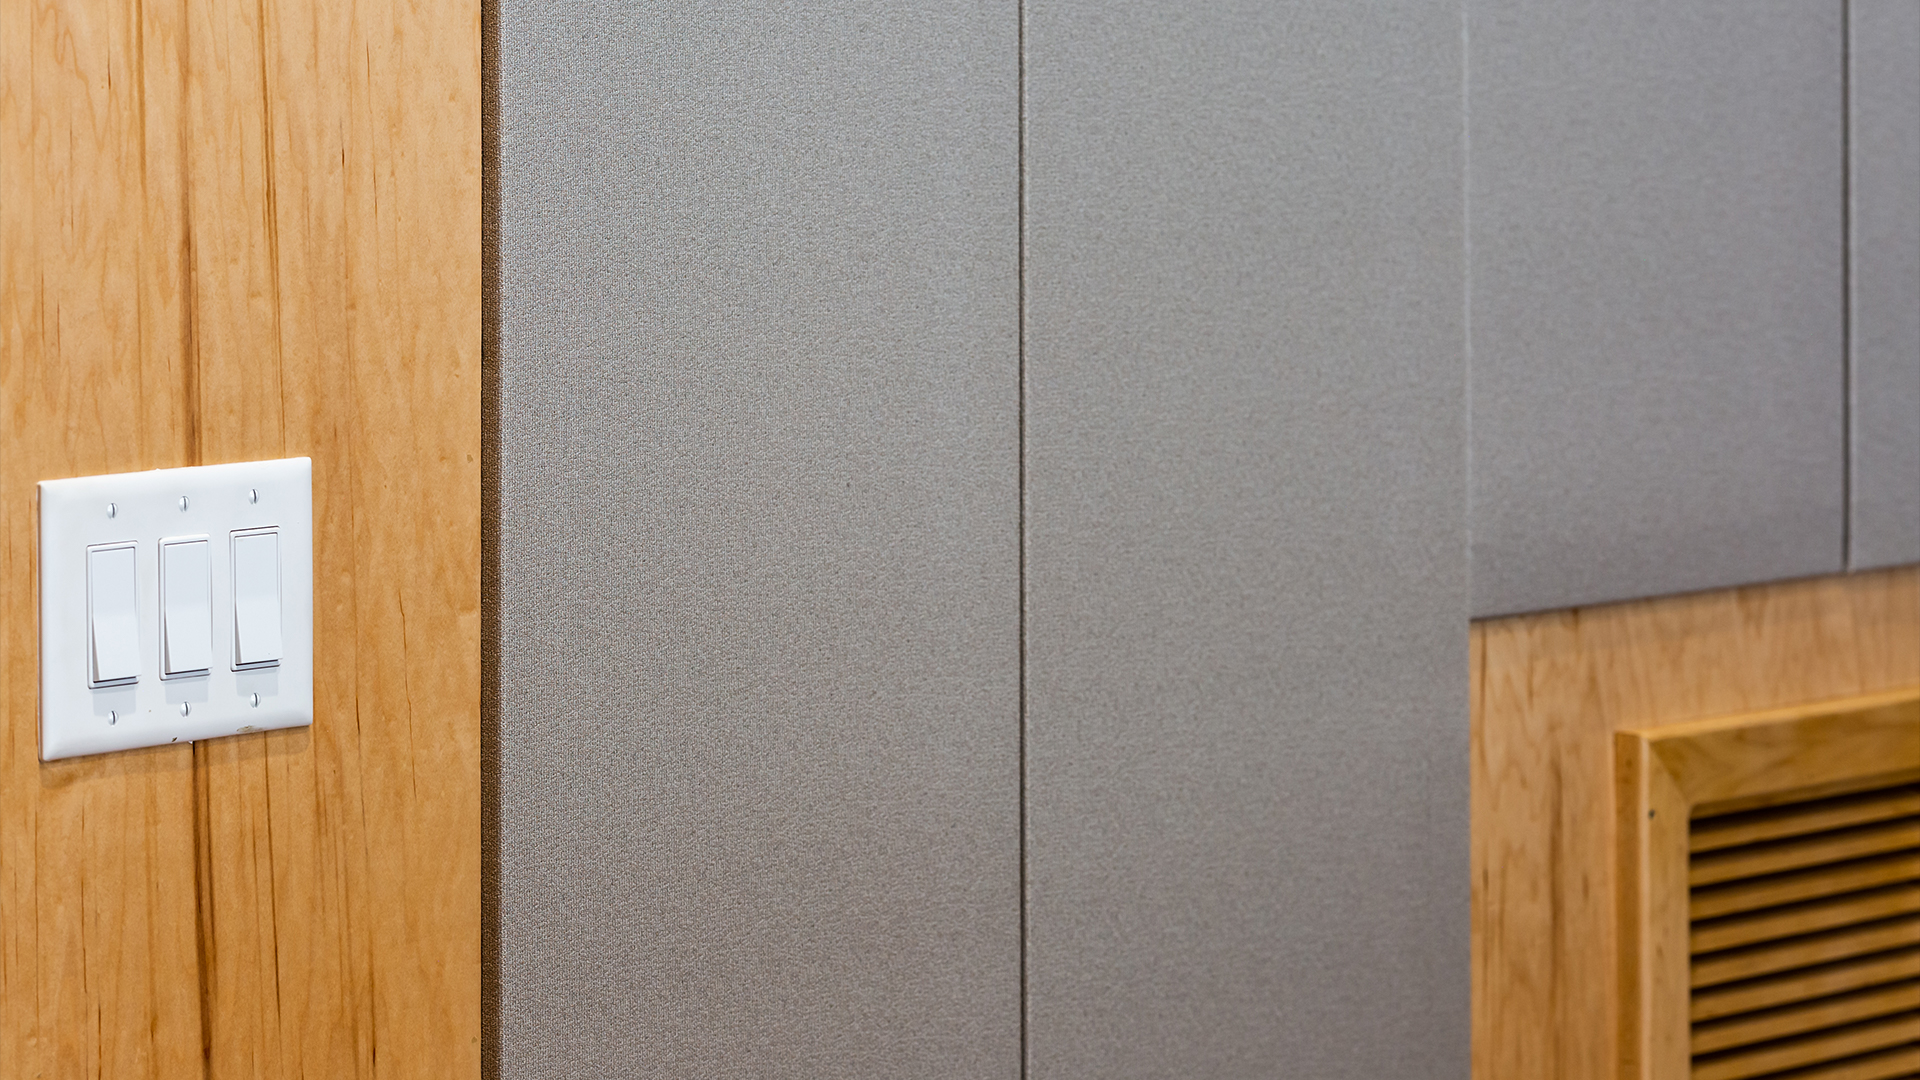 Acoustic Fabric Panel – Choosing The Right Fabric Is Crucial!